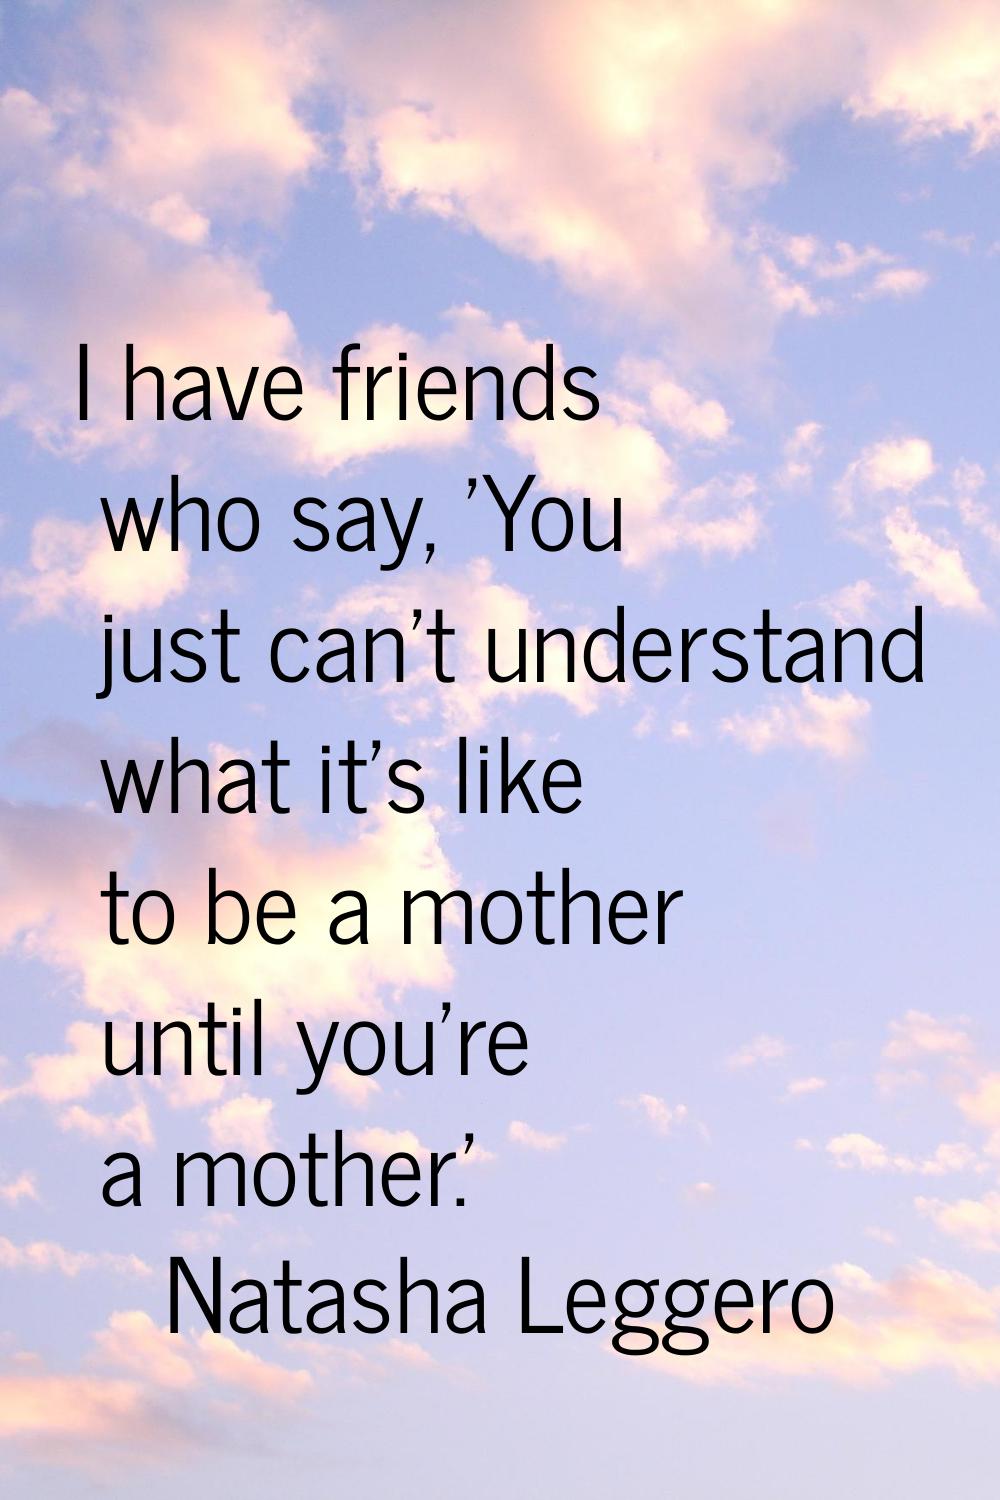 I have friends who say, 'You just can't understand what it's like to be a mother until you're a mot